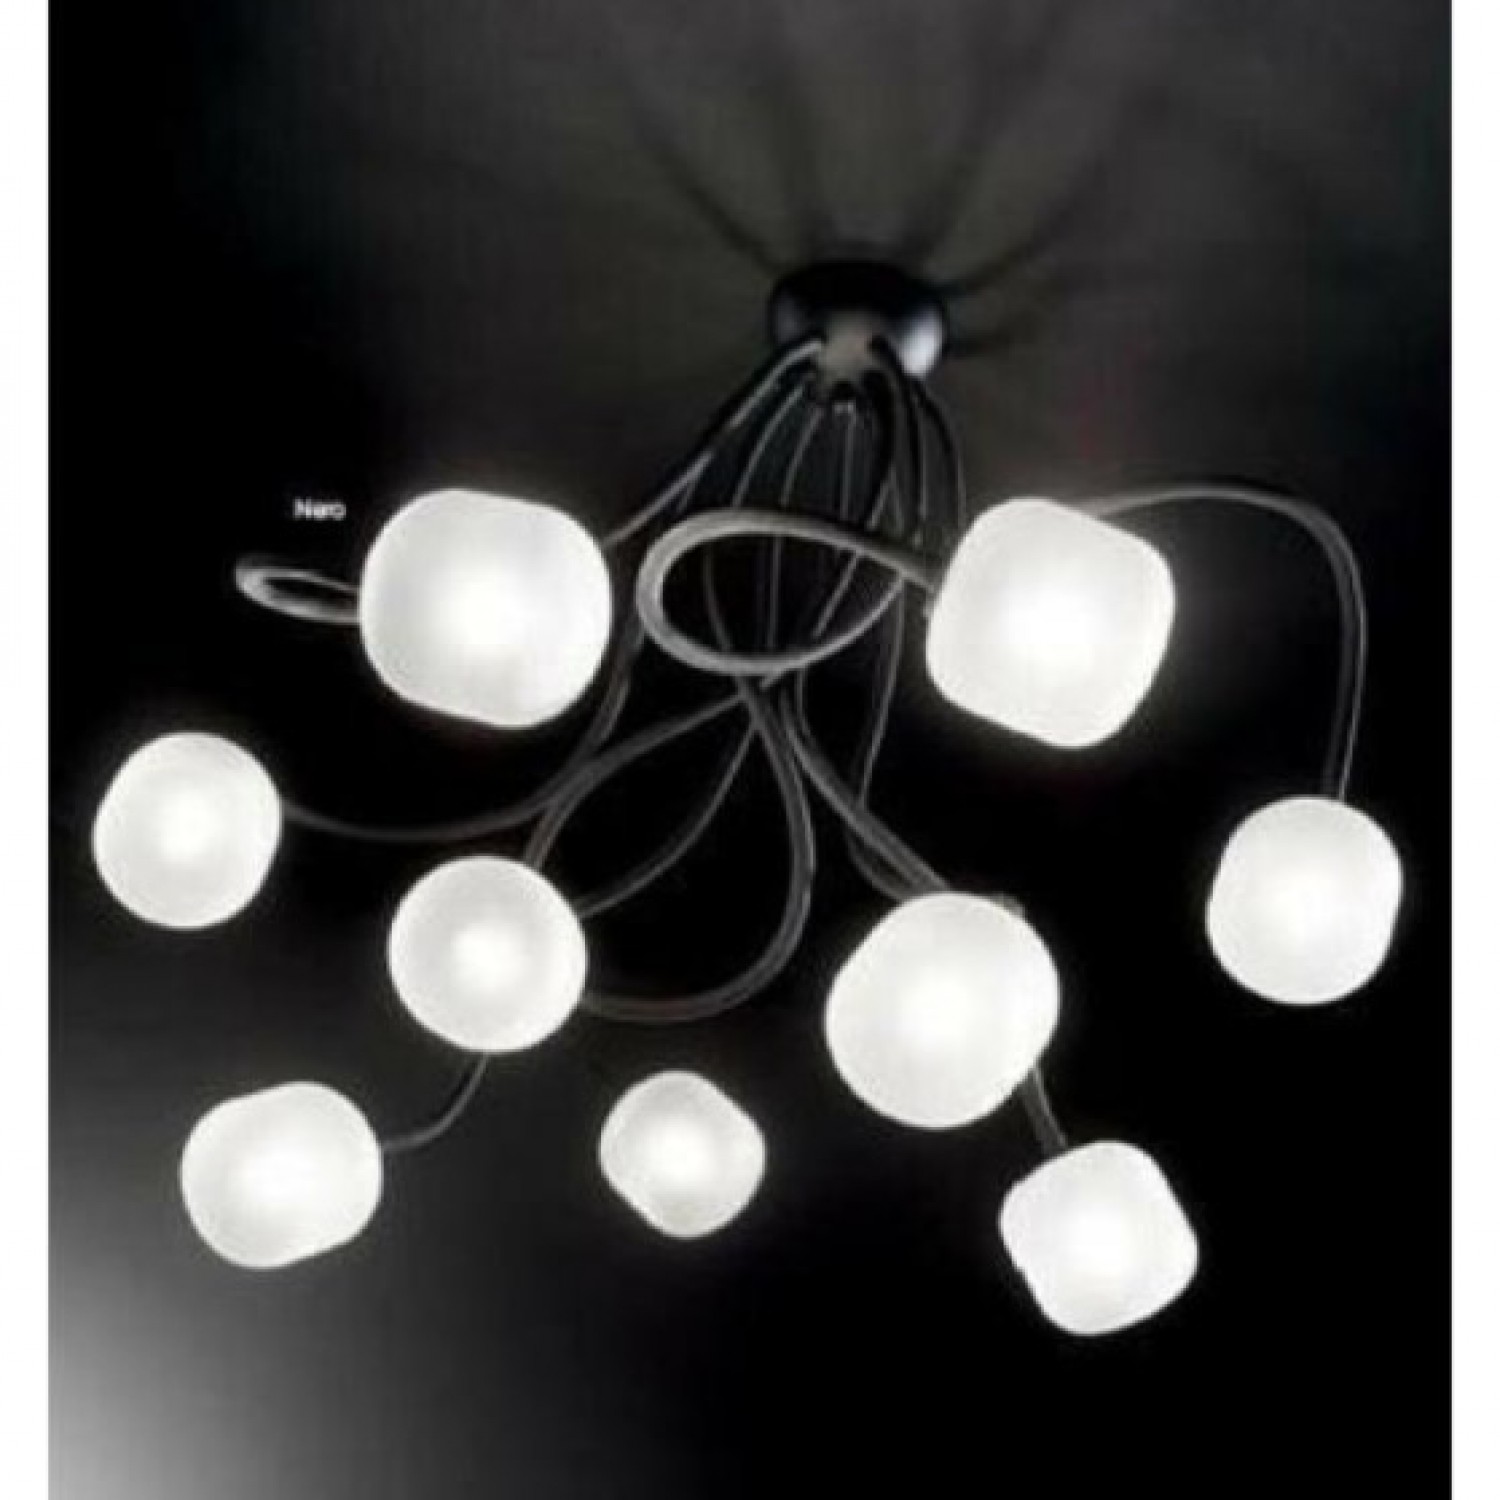 Люстра Ideal Lux OCTOPUS PL9 BIANCO 174990